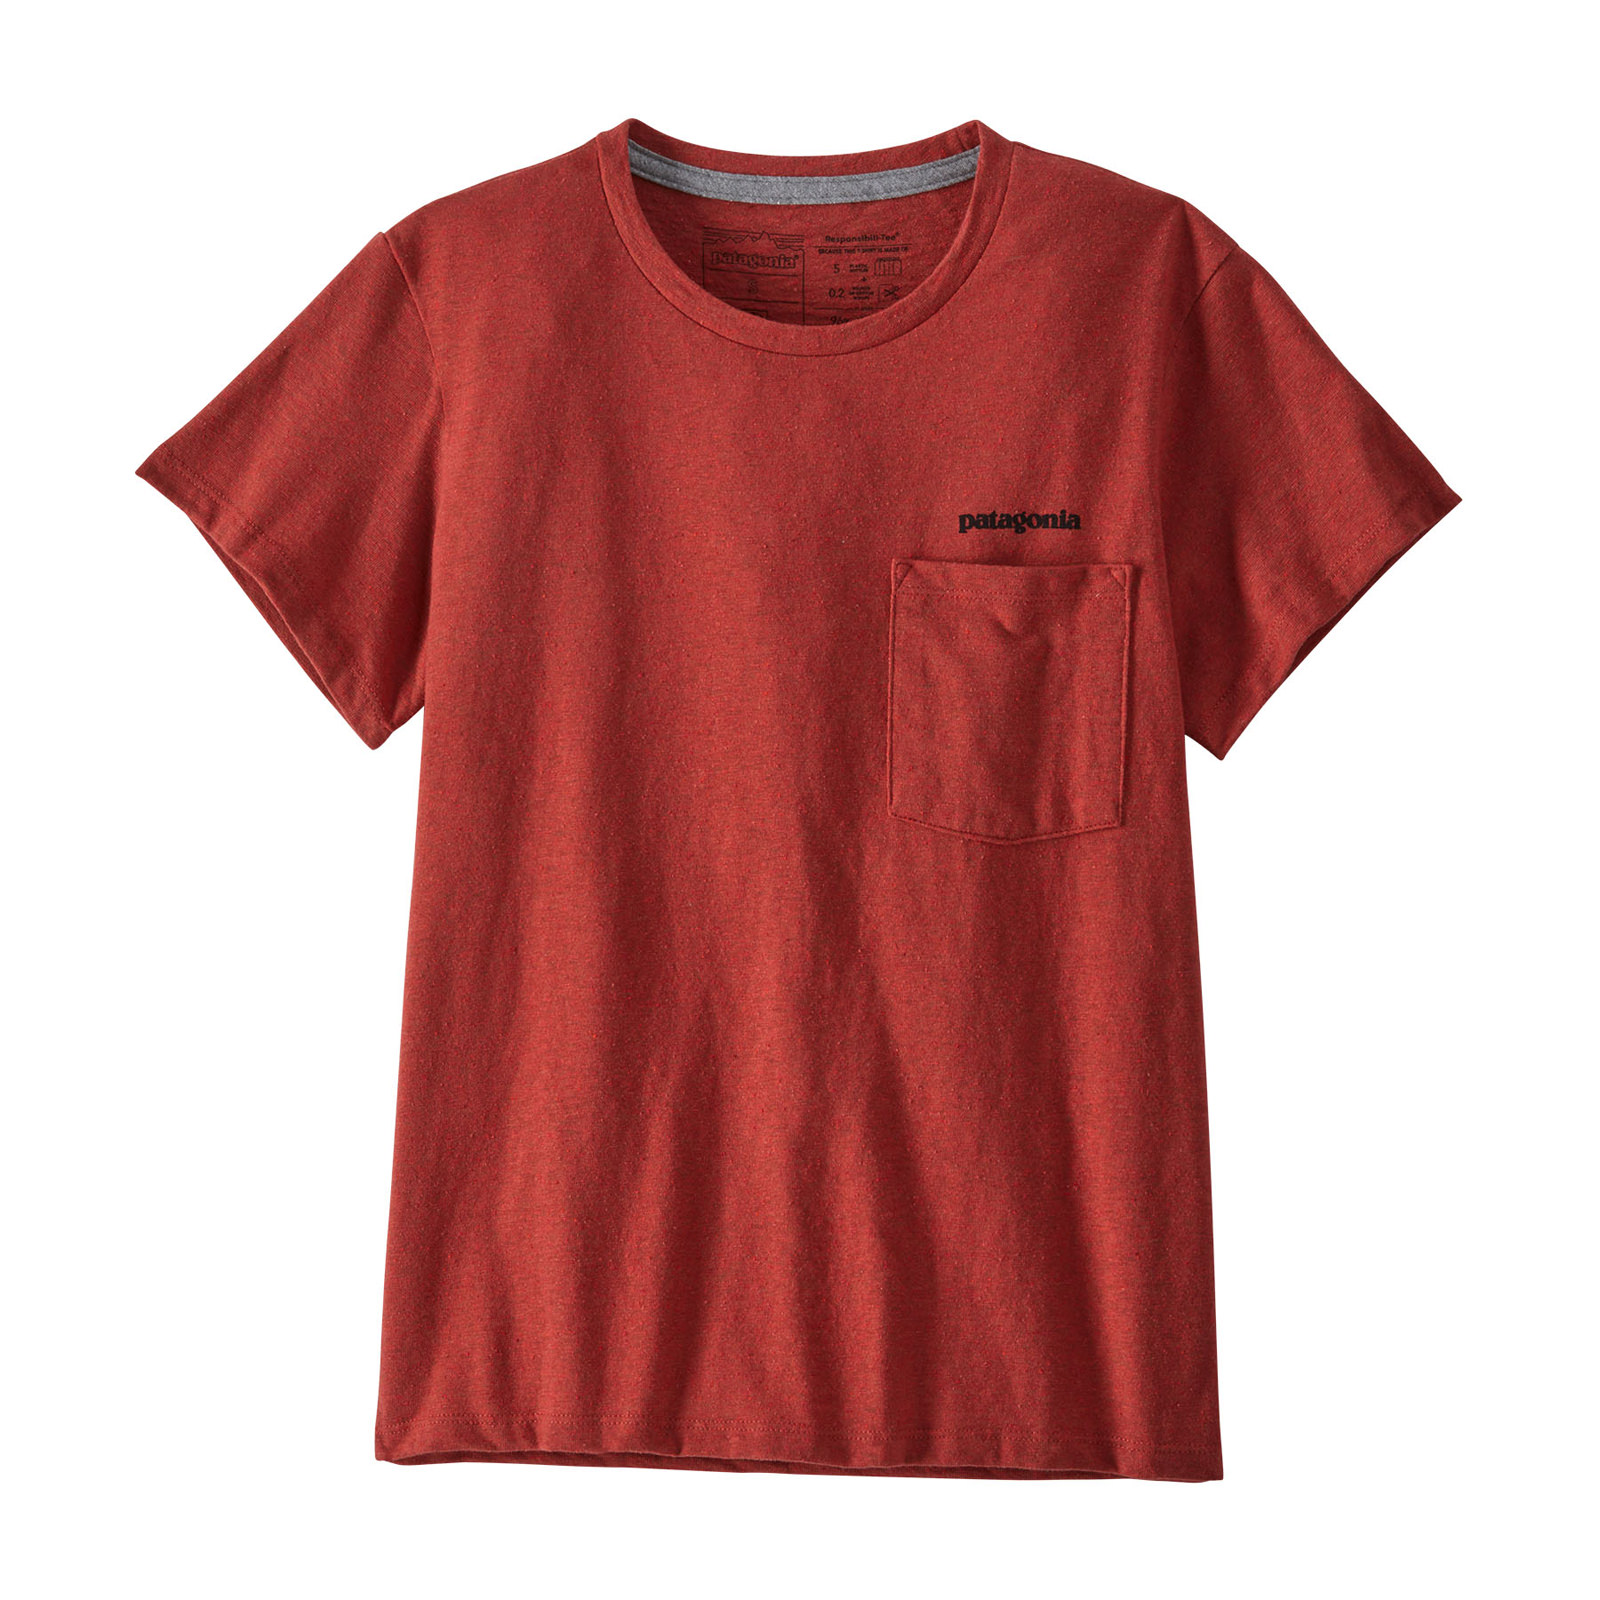 Patagonia Women's Home Water Trout Pocket Responsibili-Tee - AvidMax